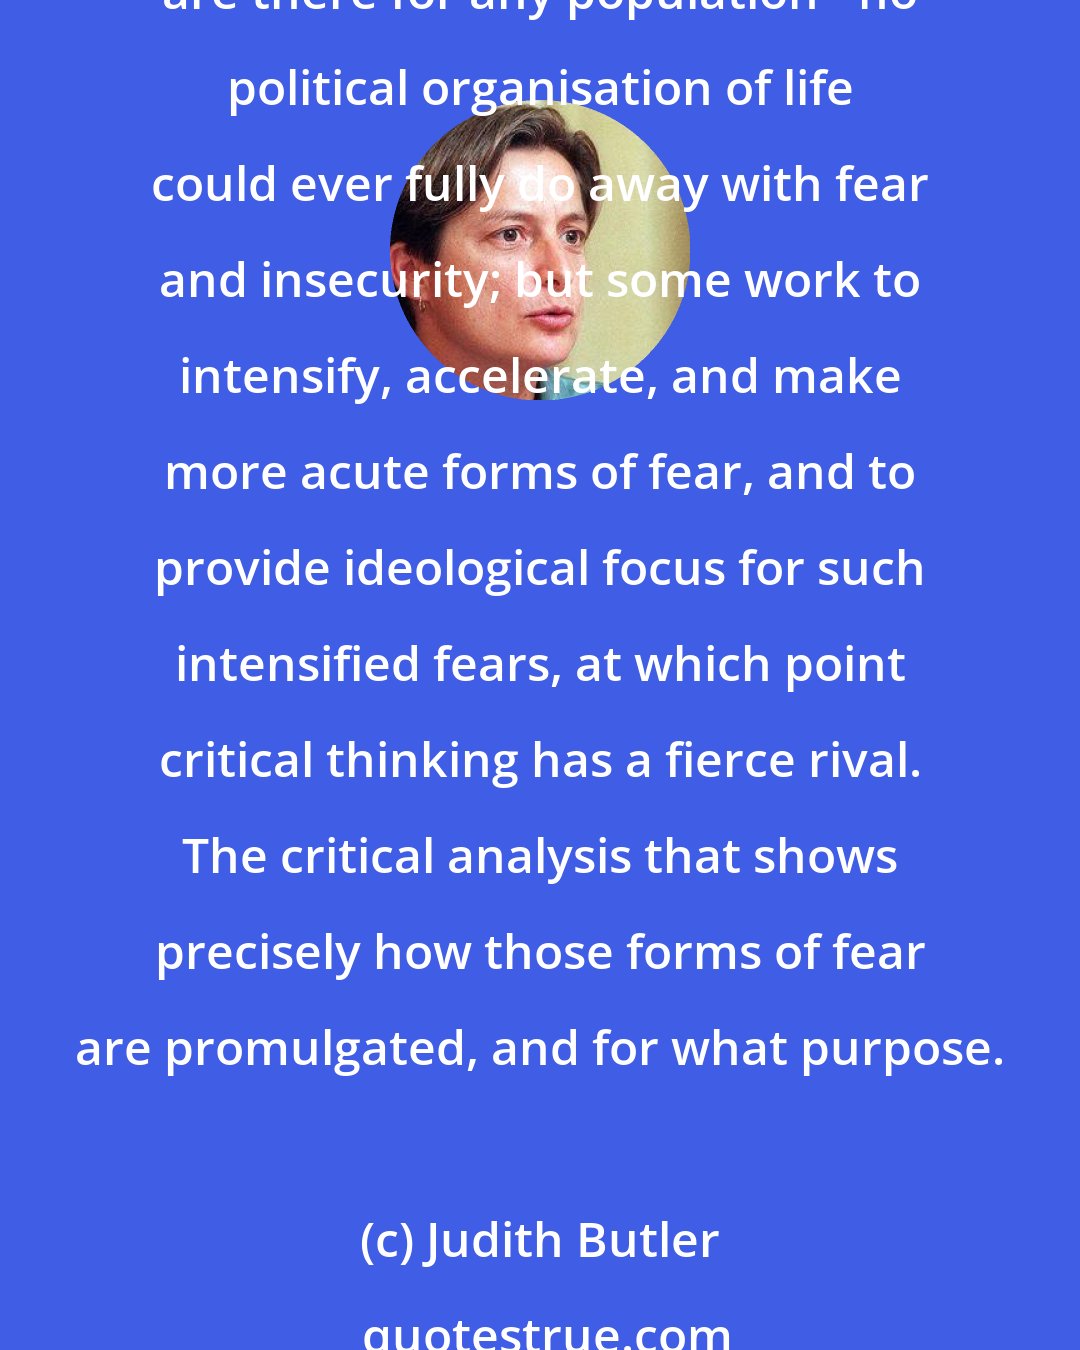 Judith Butler: I do not mean to say that such institutions act unilaterally on psychic life, or that they determine certain psychic outcomes. Rather, they exploit forms of fear and insecurity that are there for any population - no political organisation of life could ever fully do away with fear and insecurity; but some work to intensify, accelerate, and make more acute forms of fear, and to provide ideological focus for such intensified fears, at which point critical thinking has a fierce rival. The critical analysis that shows precisely how those forms of fear are promulgated, and for what purpose.